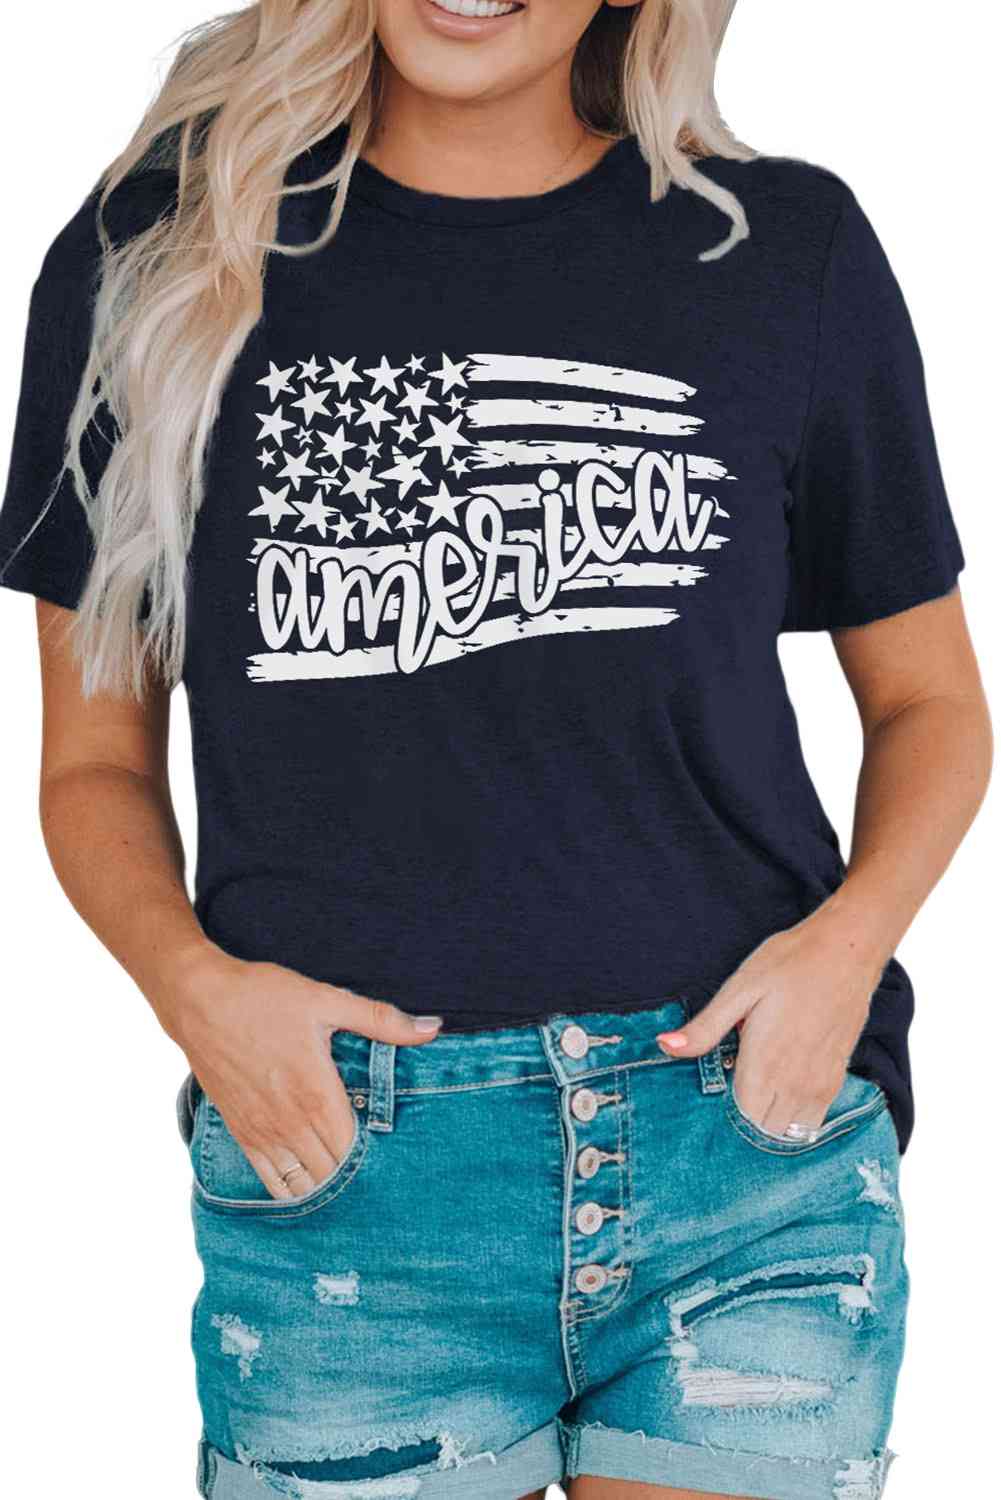 AMERICA US Flag Graphic Tee Print on any thing USA/STOD clothes